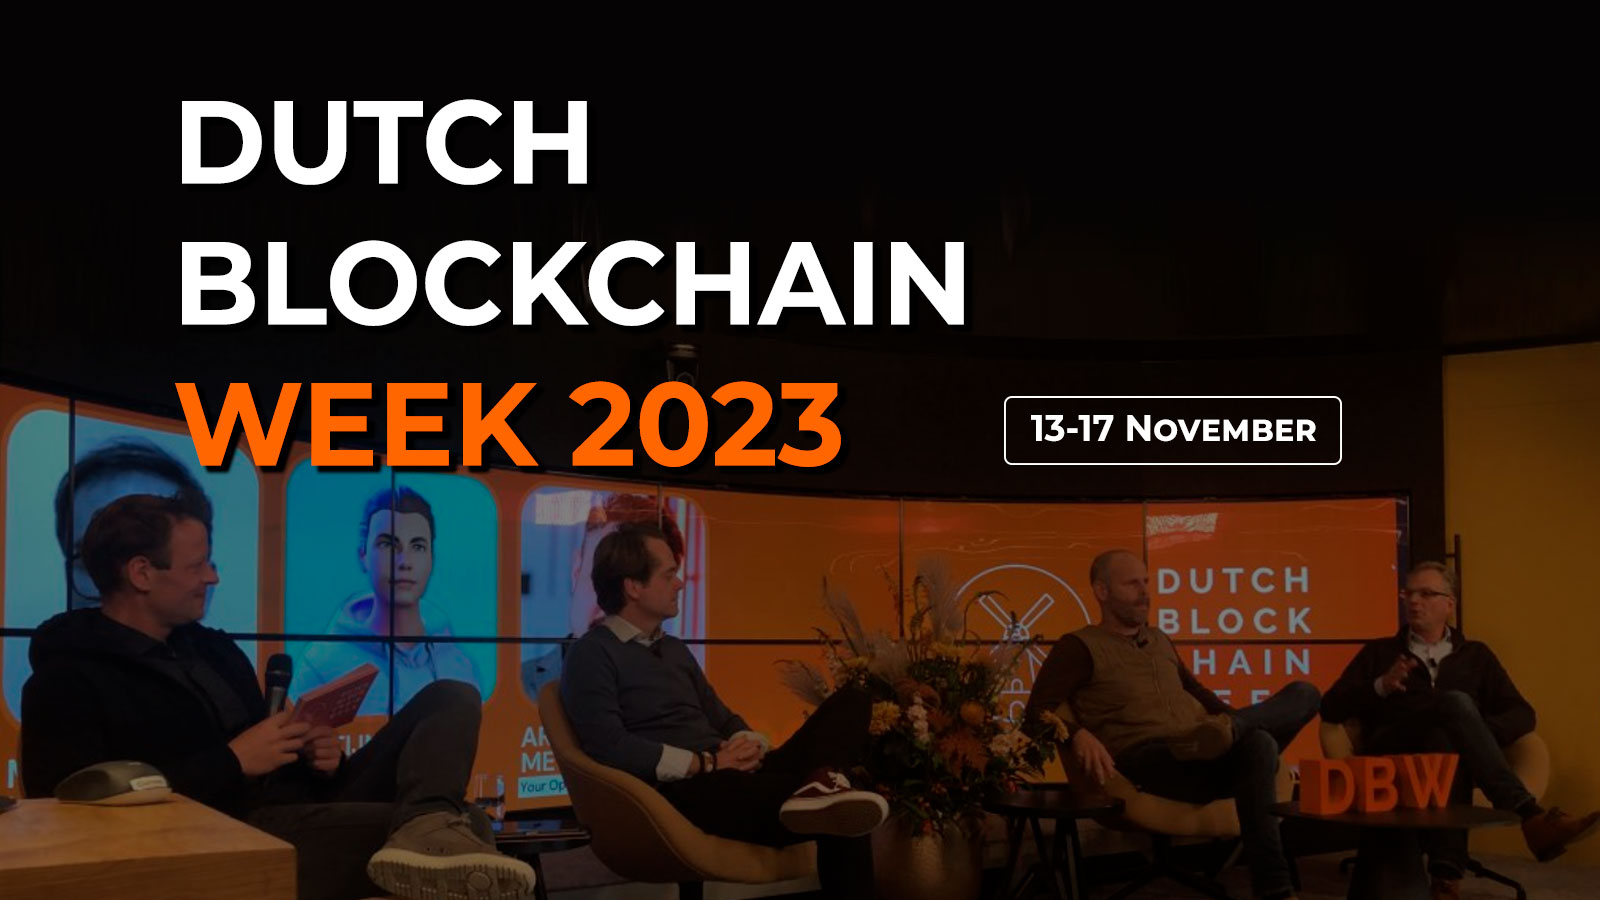 Celebrating Five Years of Dutch Blockchain Week 2023: A Decentralized Event Week About Web3, Crypto & Blockchain Technology In The Netherlands